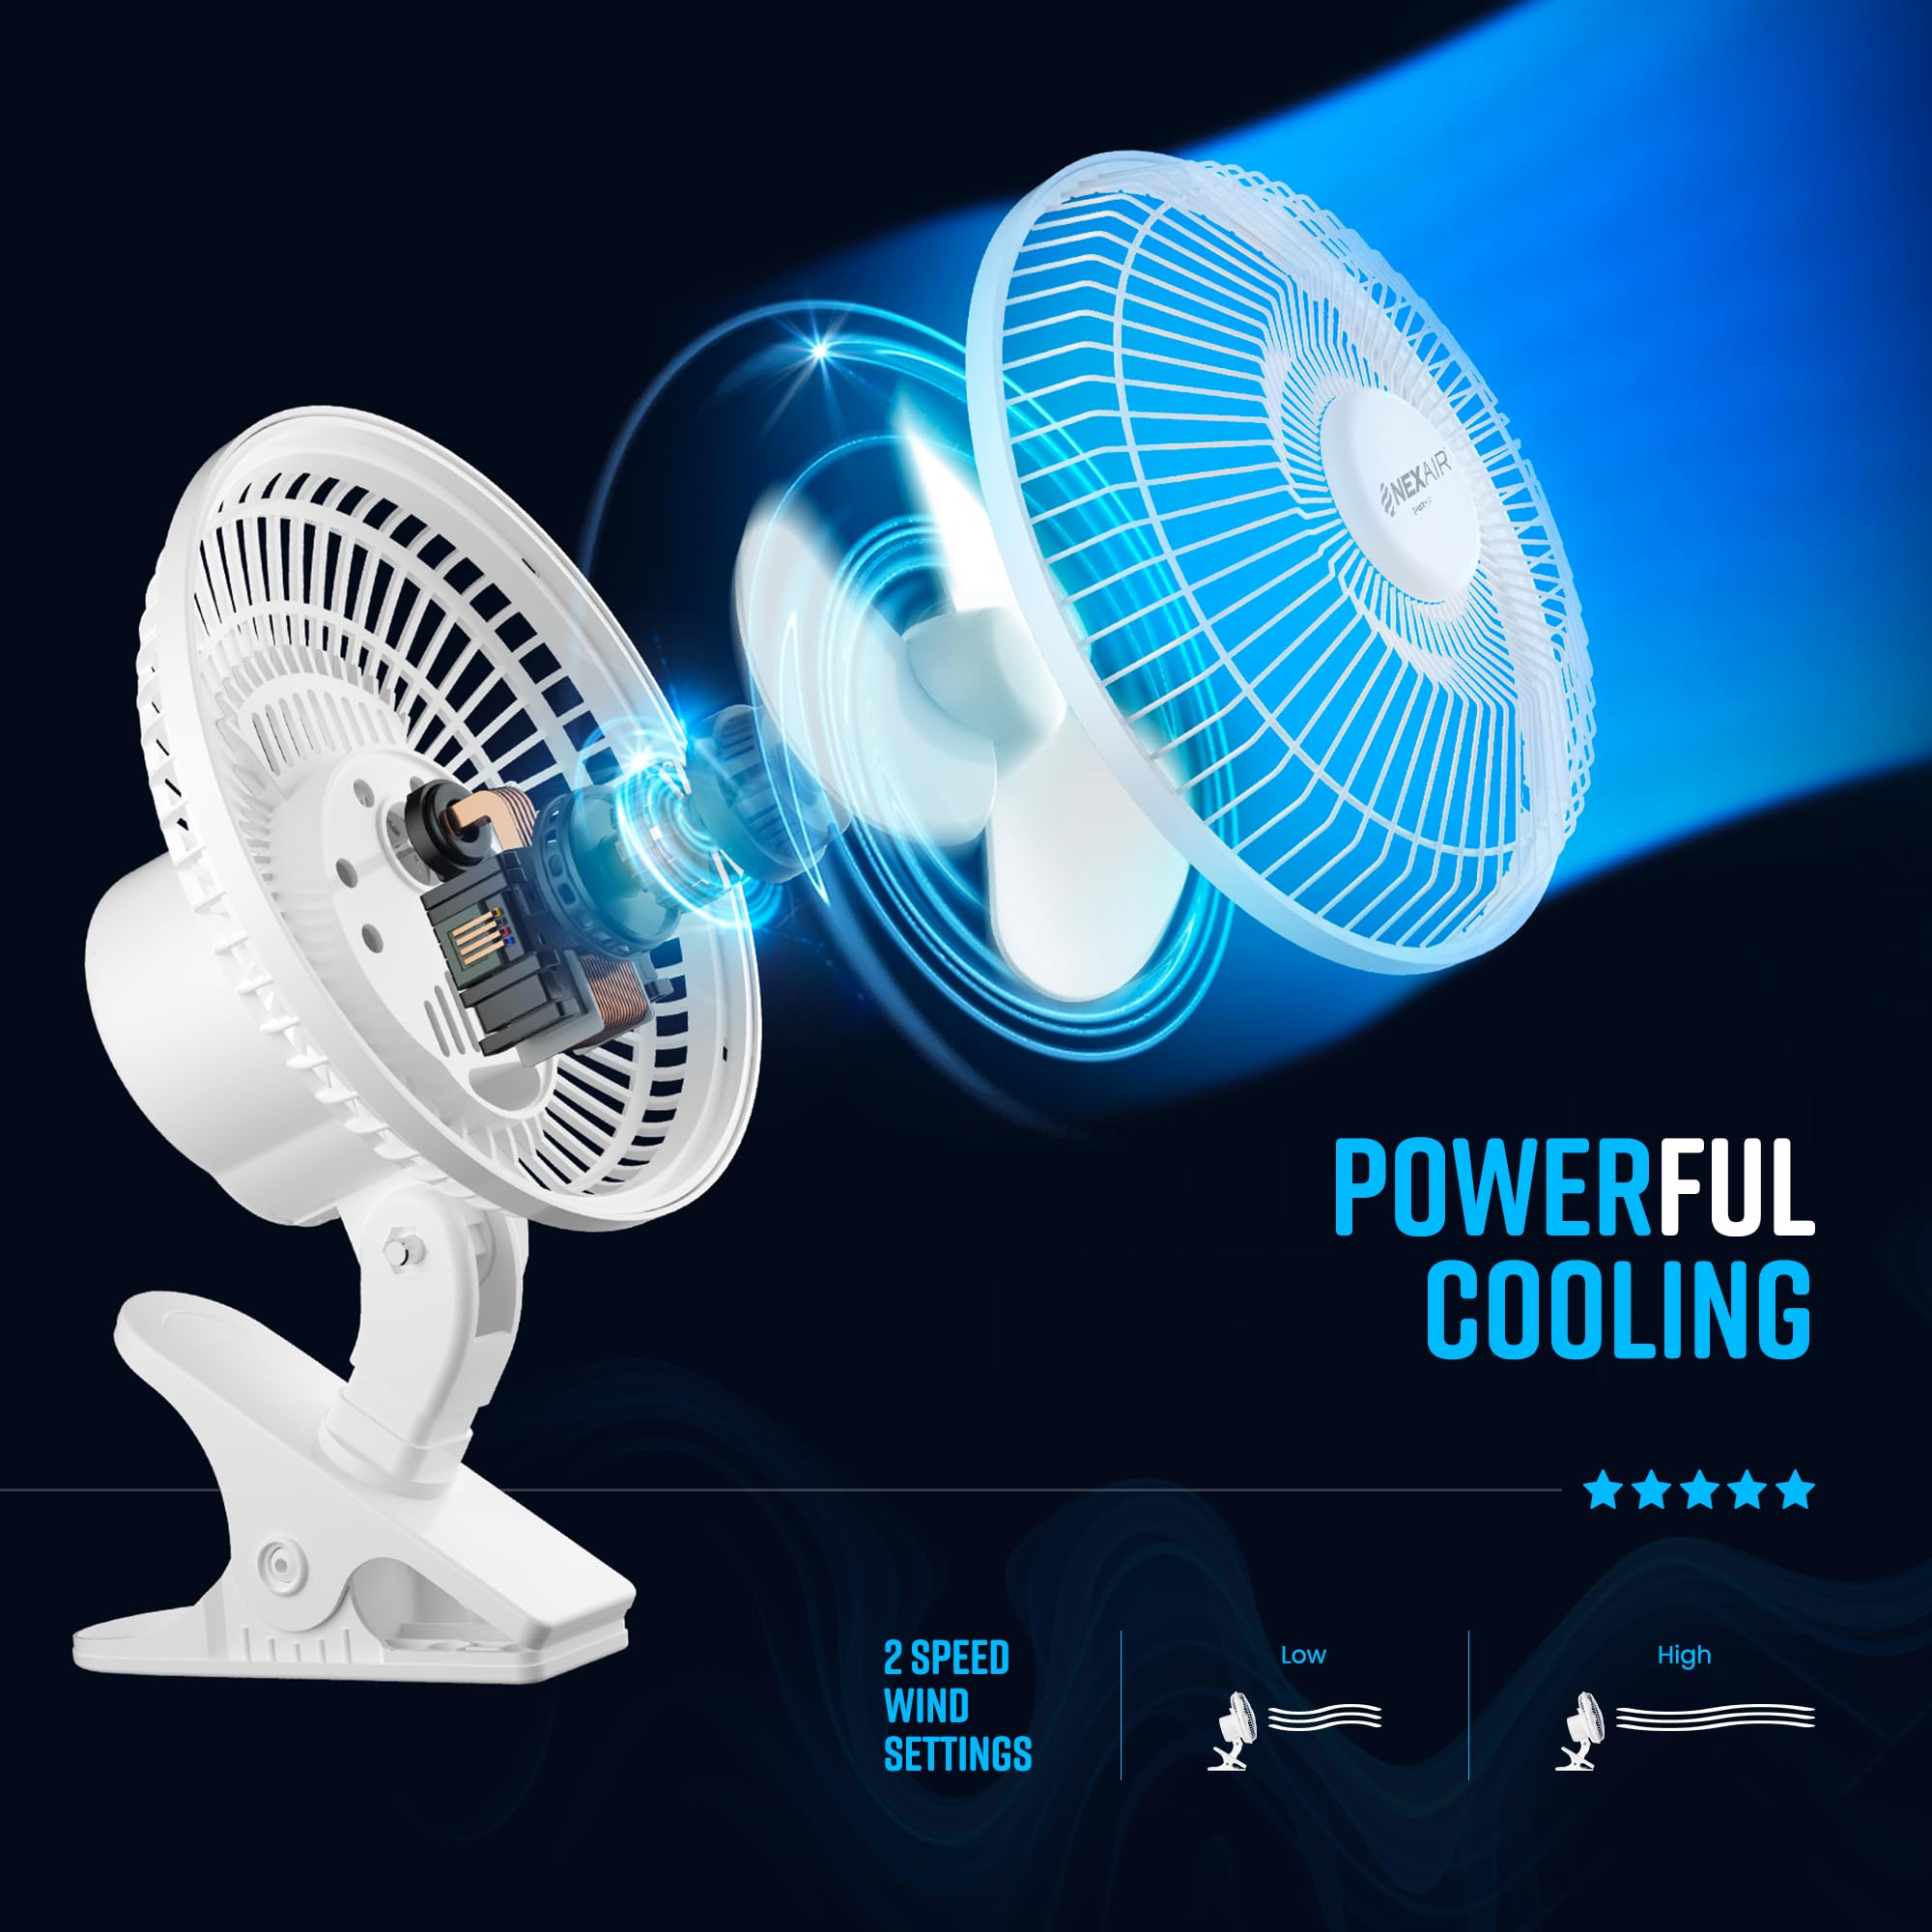 NEXAIR 6-Inch Clip on Fan, 360° Rotation, Two Speed Portable Clip Fan With Strong Clamp Grip, Quiet Operating Desk Fan Made Of Durable Material, Great For Bedroom, Office, Living Room